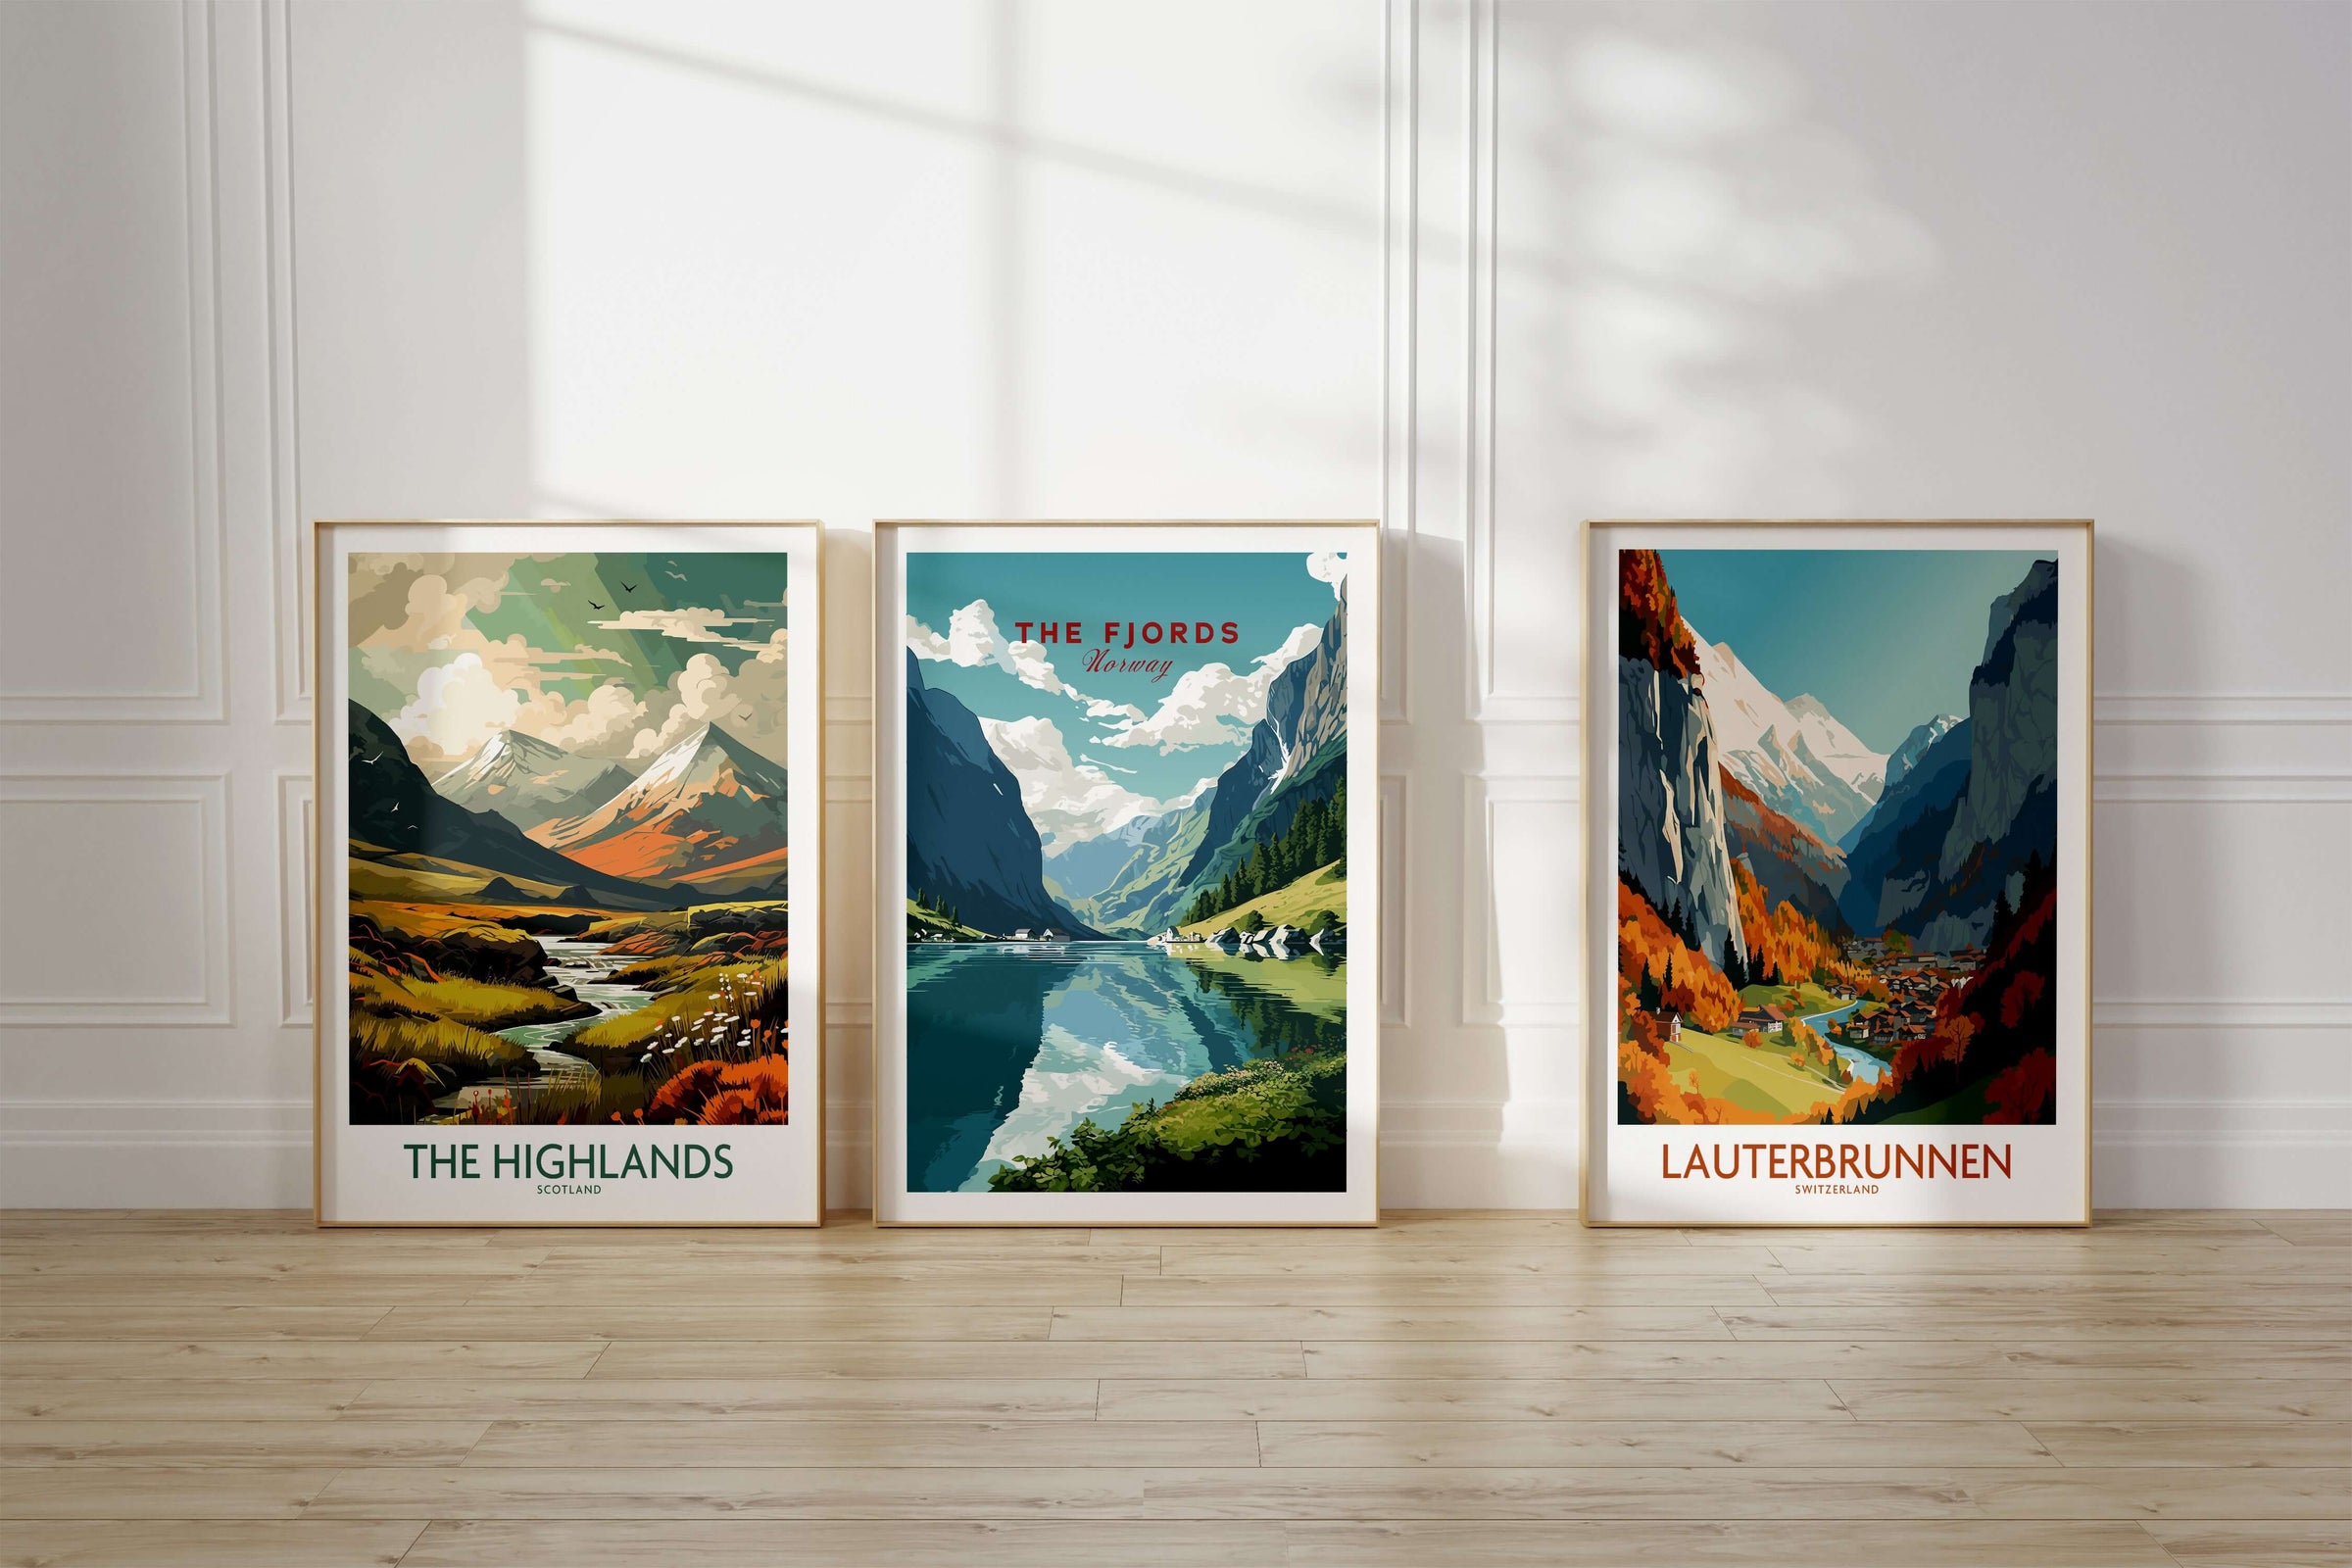 A set of three framed travel poster prints in natural wood frames resting on the floor. Featuring the locations of The Highlands in Scotland, The Fjords in Norway and Lauterbrunnen in Switzerland. 